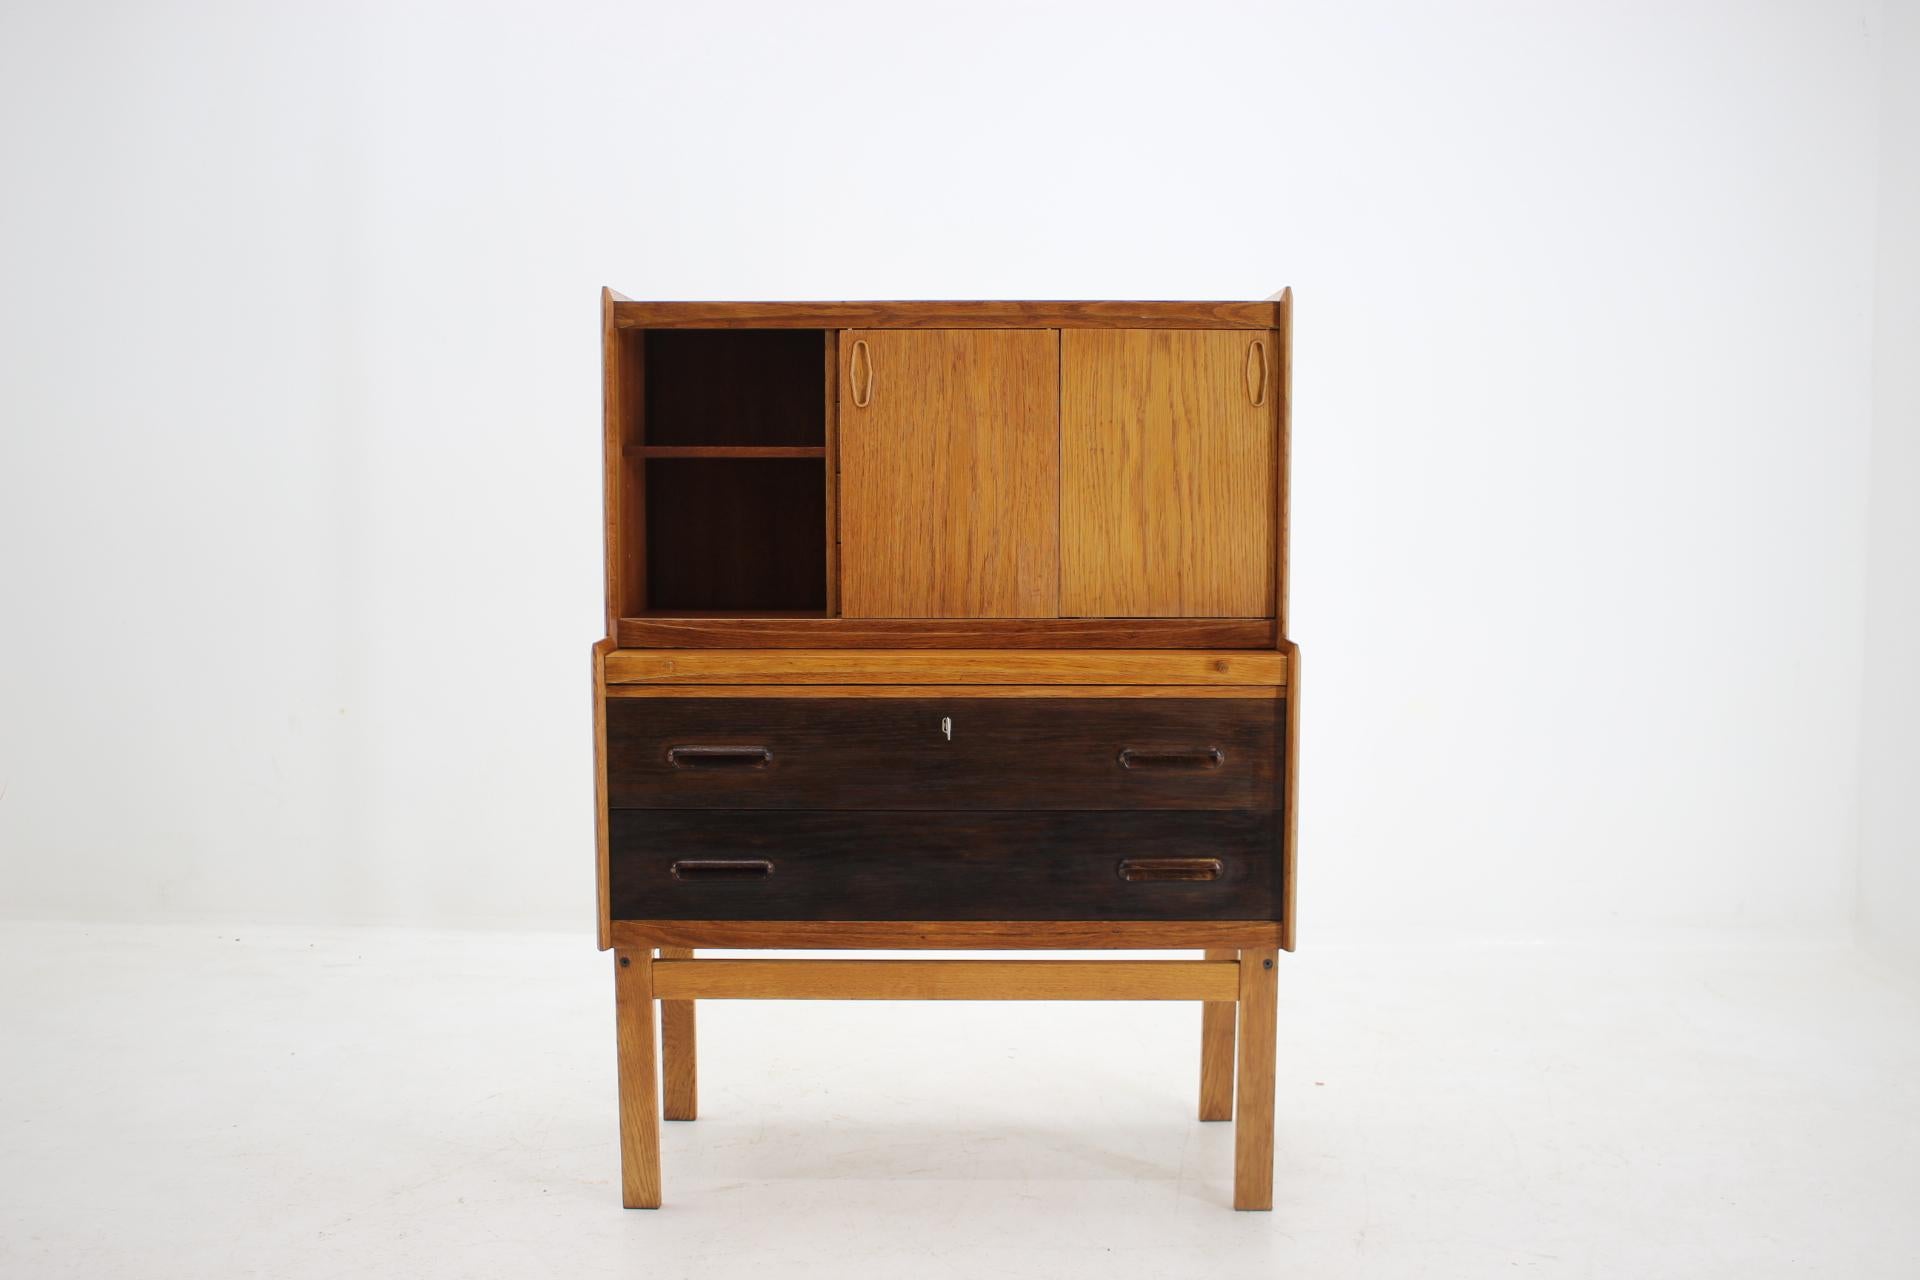 - This Danish oak writing cabinet features two drawers stained to ebony colour and four small one
- The extendable writing area desk can be extended up to 66 cm
- This item was carefully refurbished.